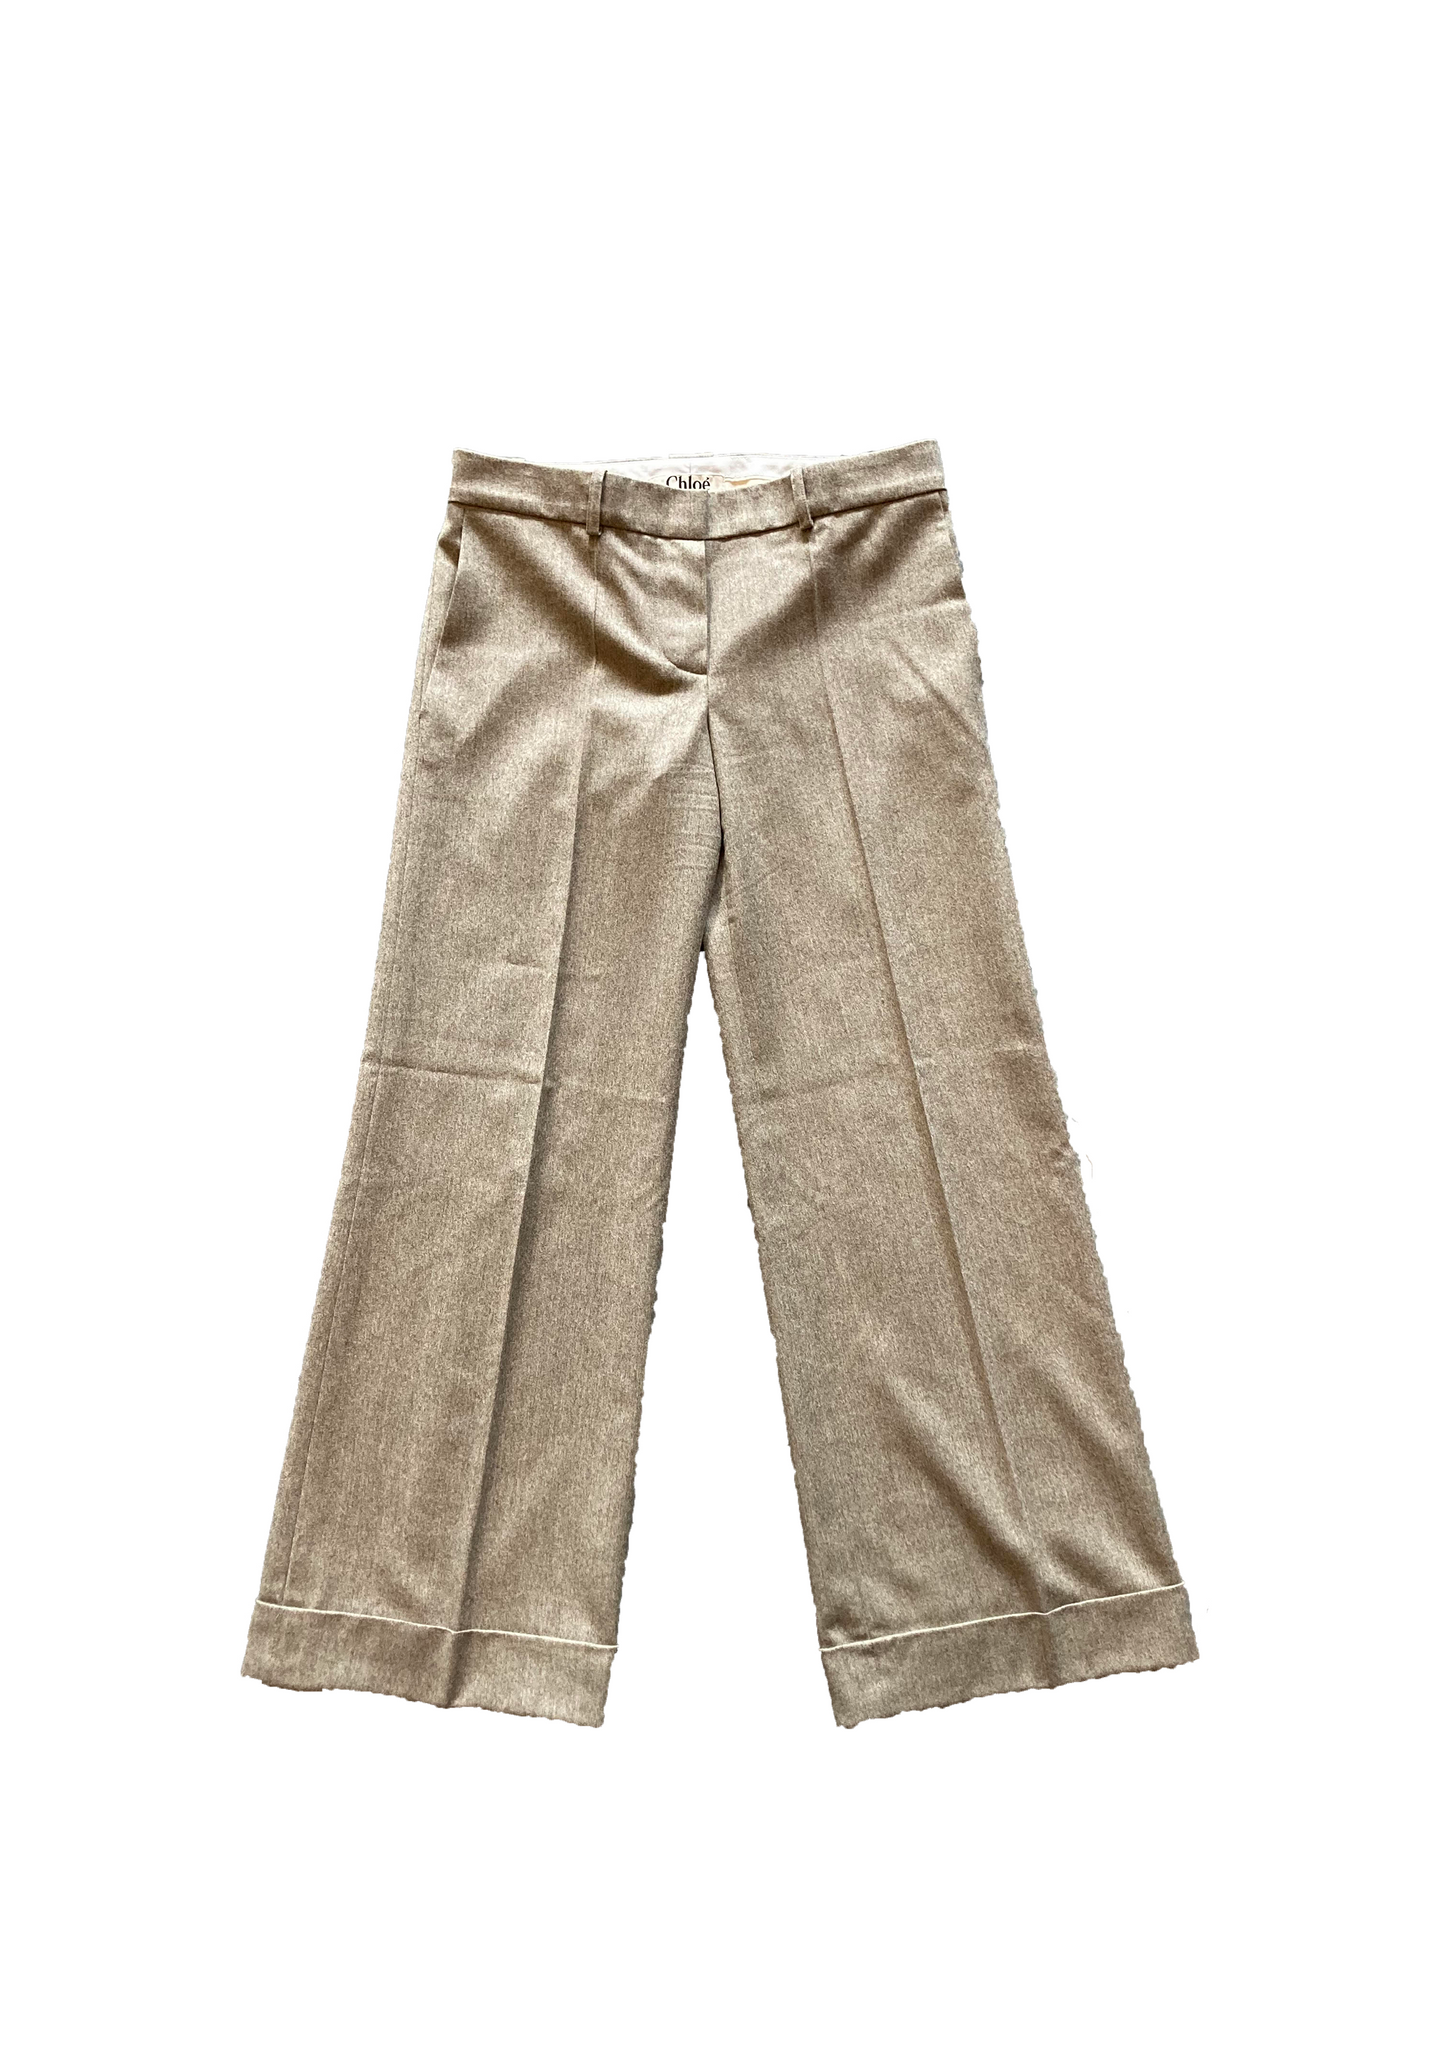 Wool/Cashmere Mix Trousers